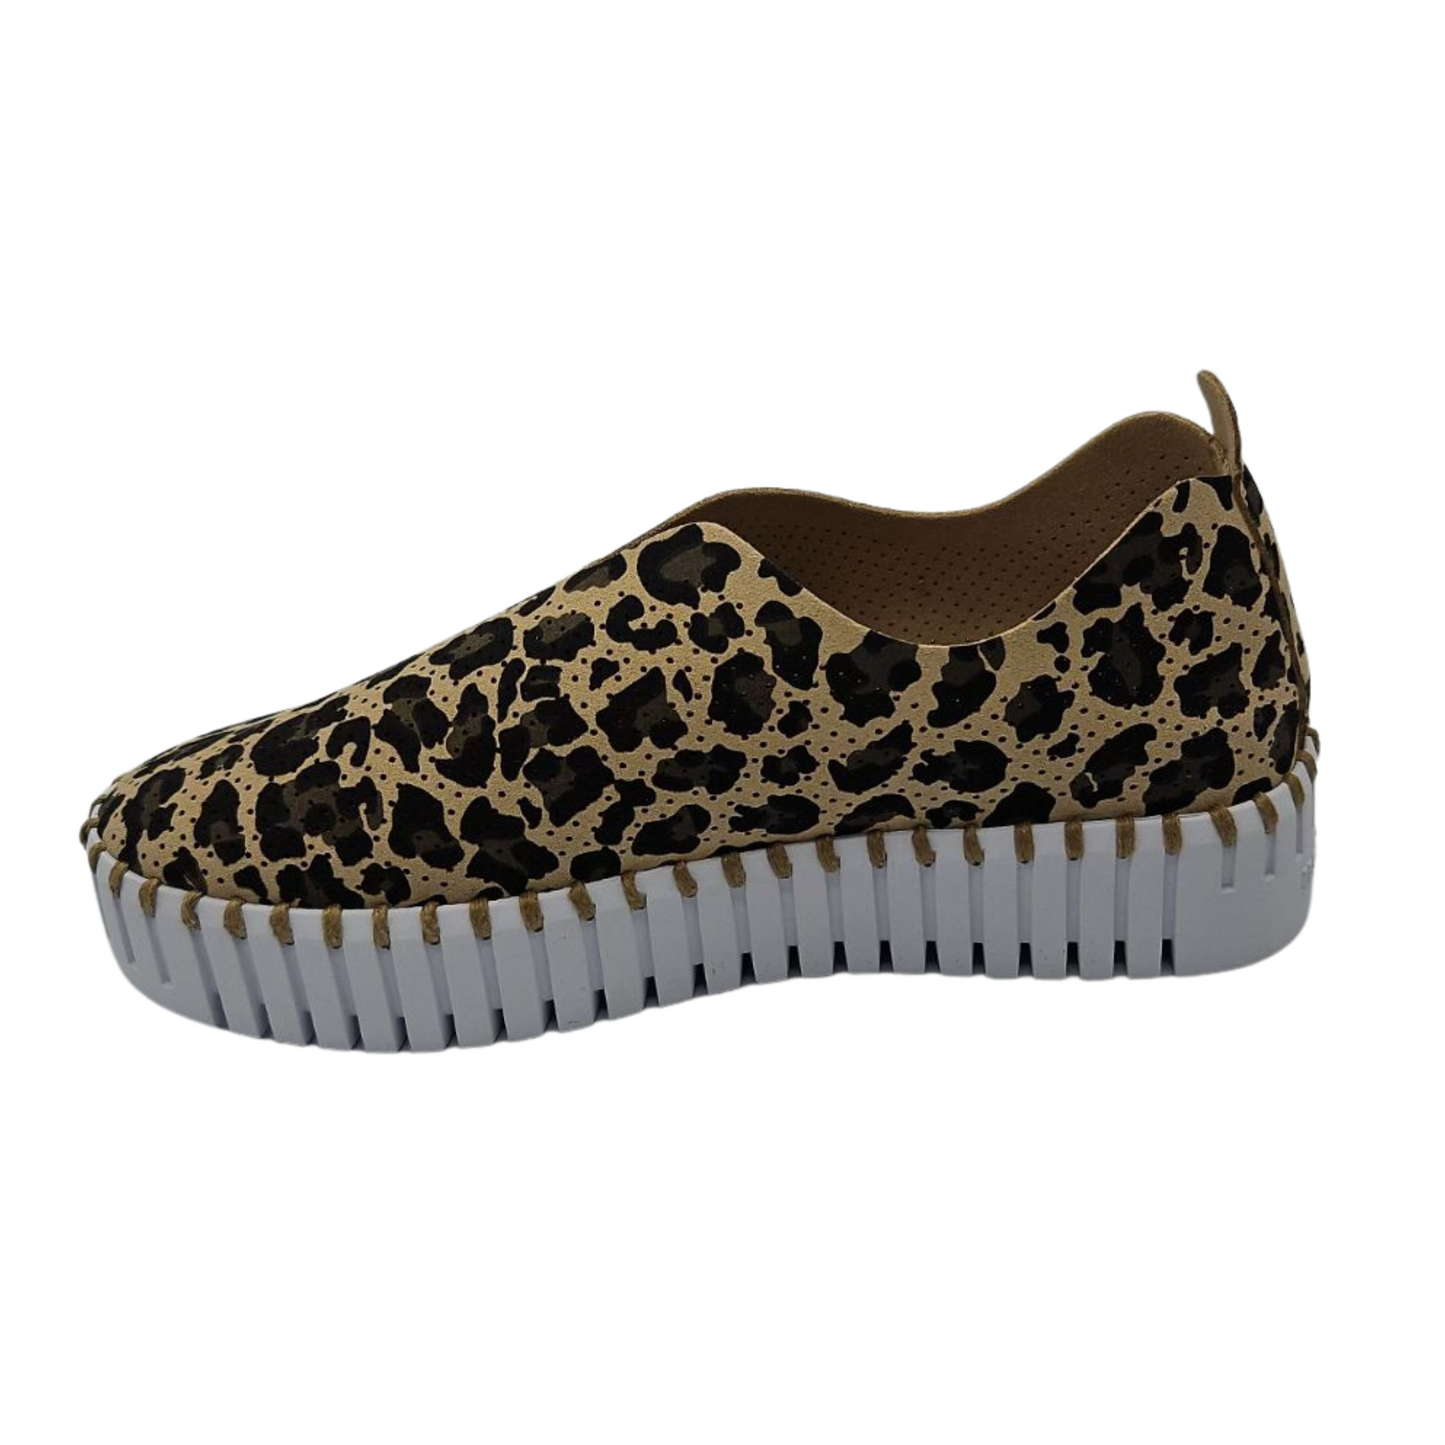 Left facing view of leopard print sneaker with perforated microfibre upper and platform white rubber outsole